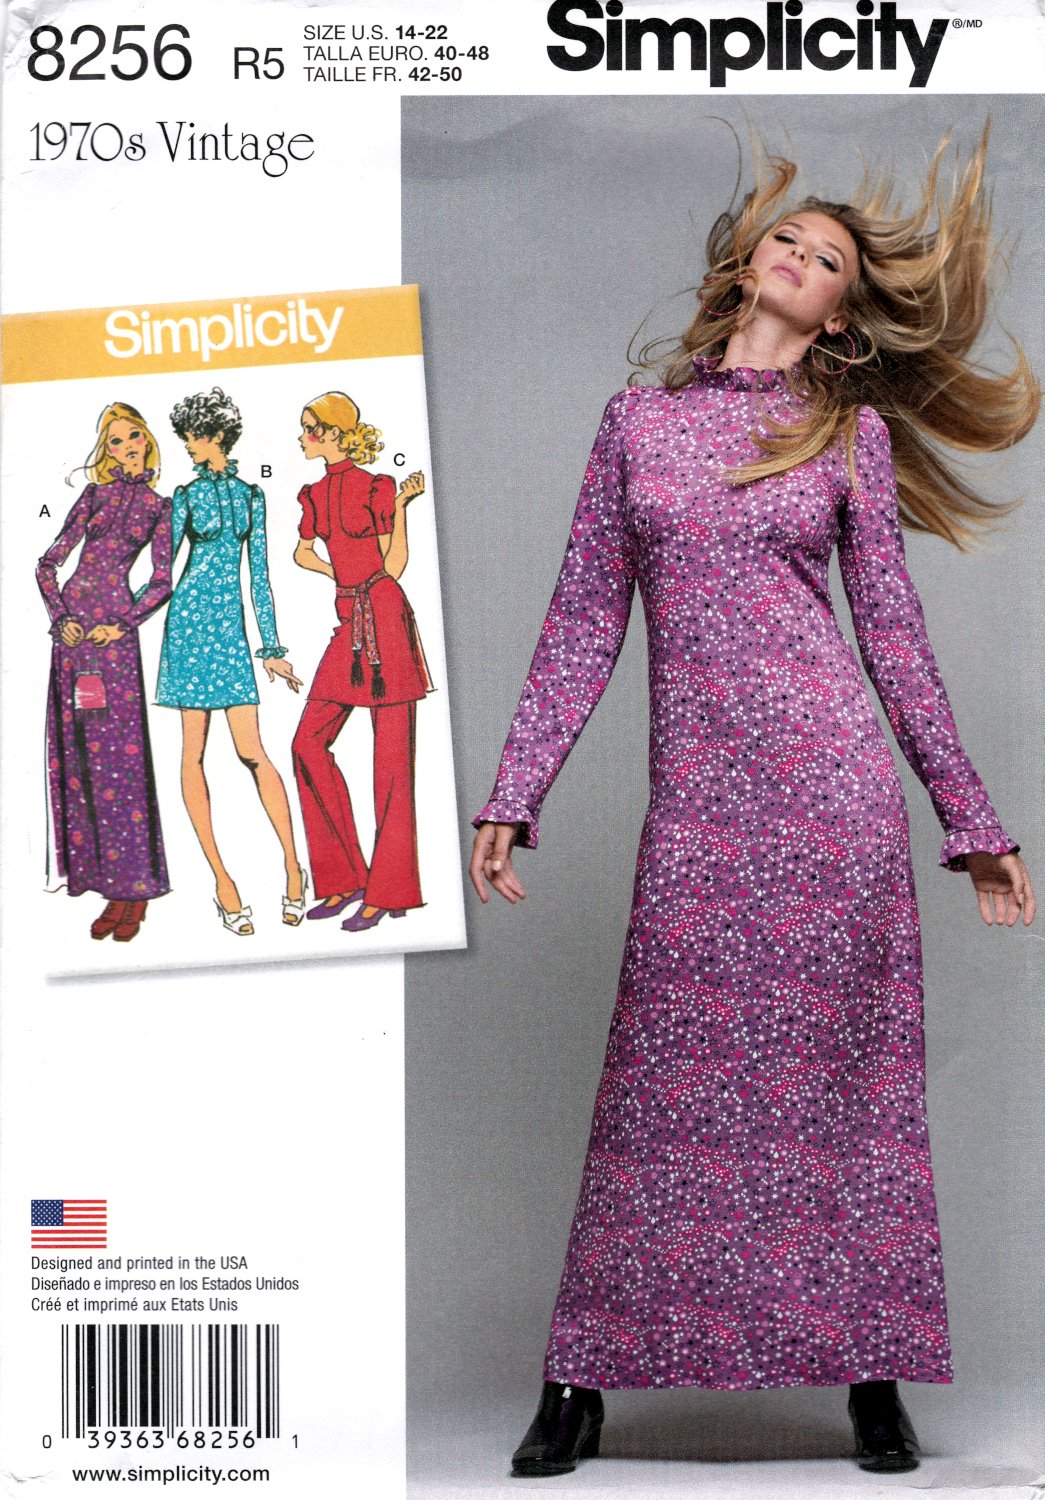 Simplicity 8256 Misses Vintage Style Dress in Two Lengths Sewing Pattern Sizes 14-22